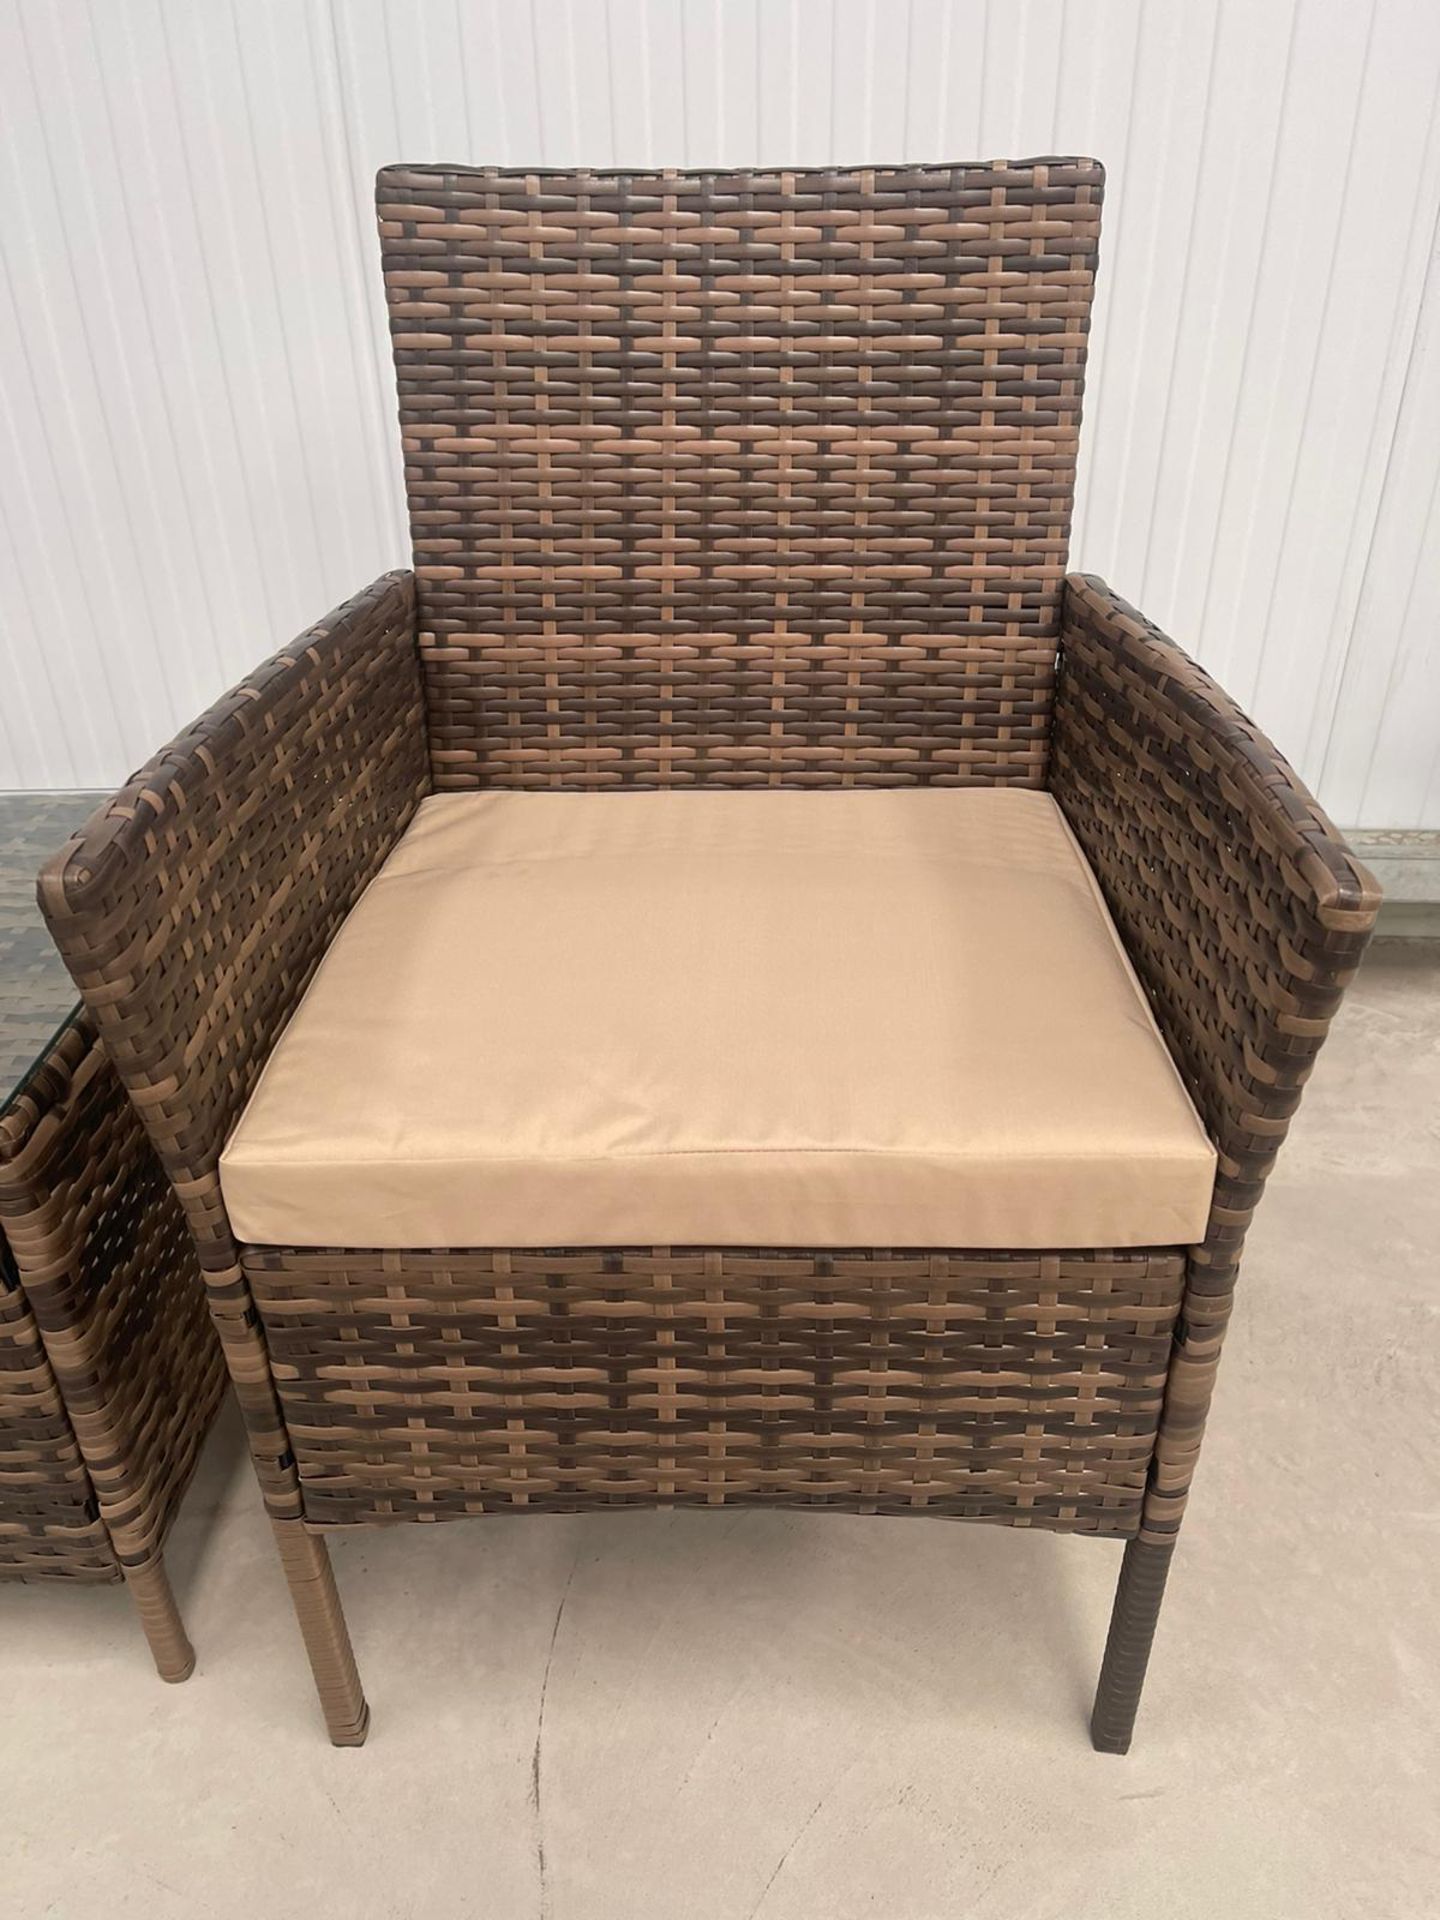 RRP £199 - NEW BROWN BISTRO SET. TABLE 40 X 40 X 45CM, CHAIR 52 X 56 X 83CM74 - Image 4 of 4